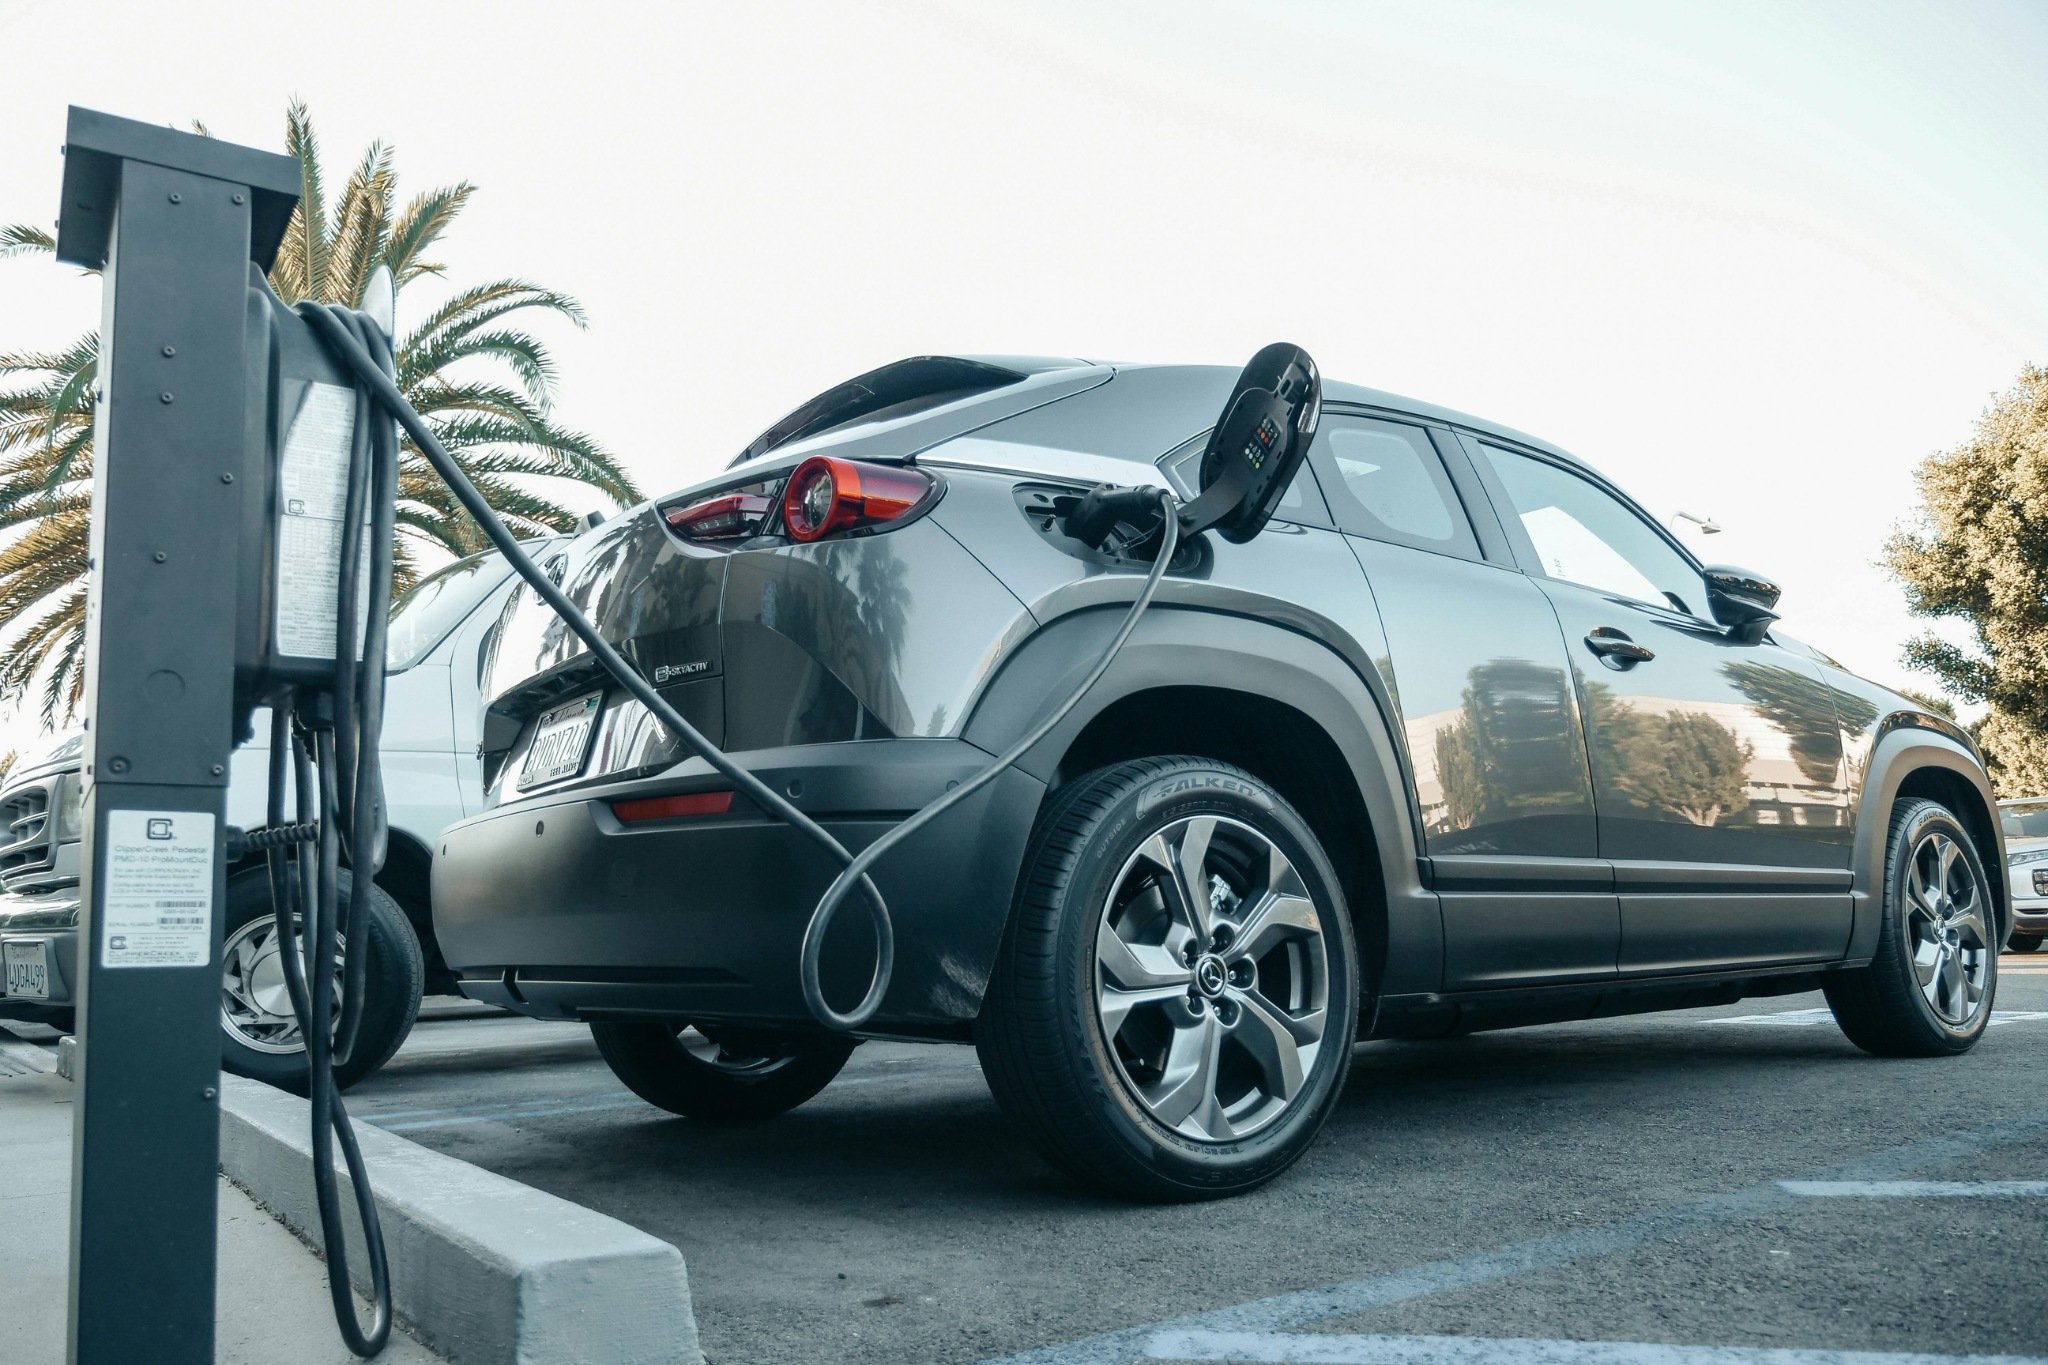 Business Insurance for Electric Vehicles: What You Need to Know